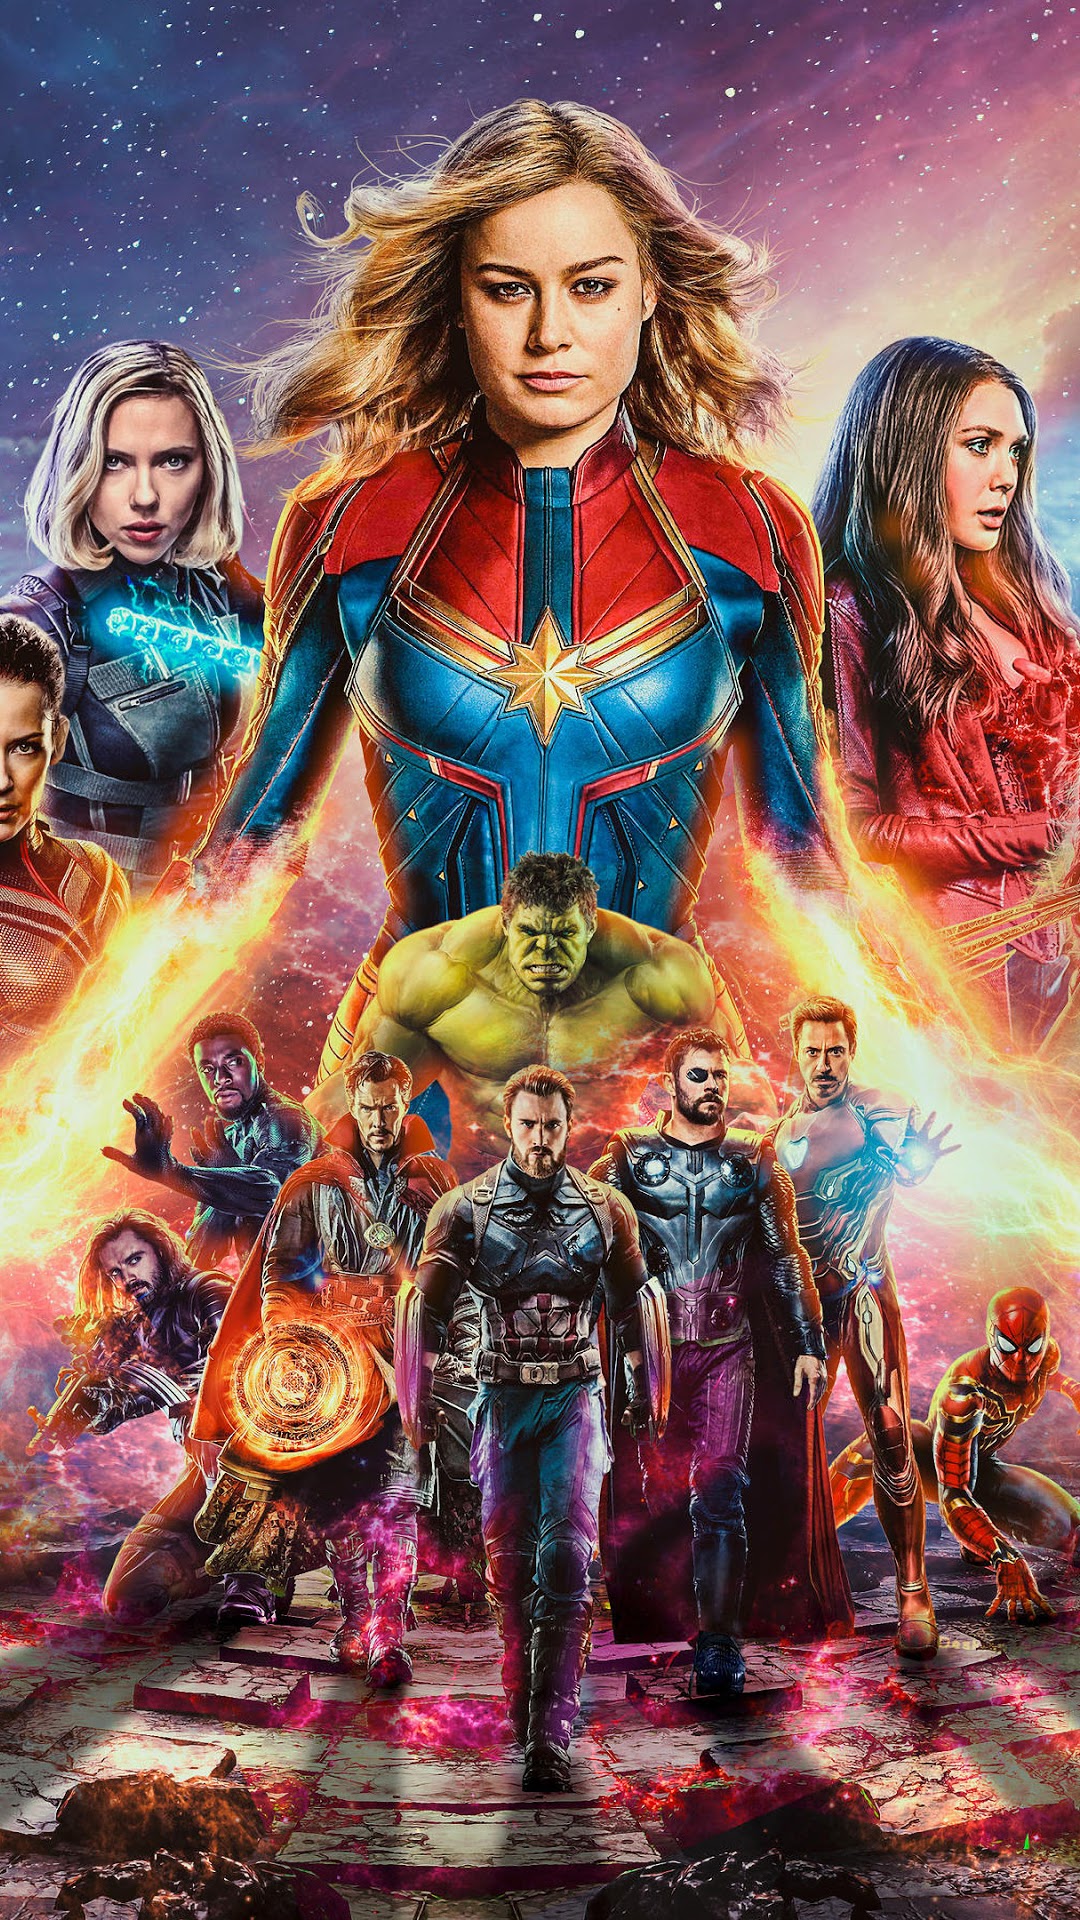 Avengers: Endgame, Captain Marvel, Cast, Characters phone HD Wallpaper, Image, Background, Photo and Picture. Mocah HD Wallpaper